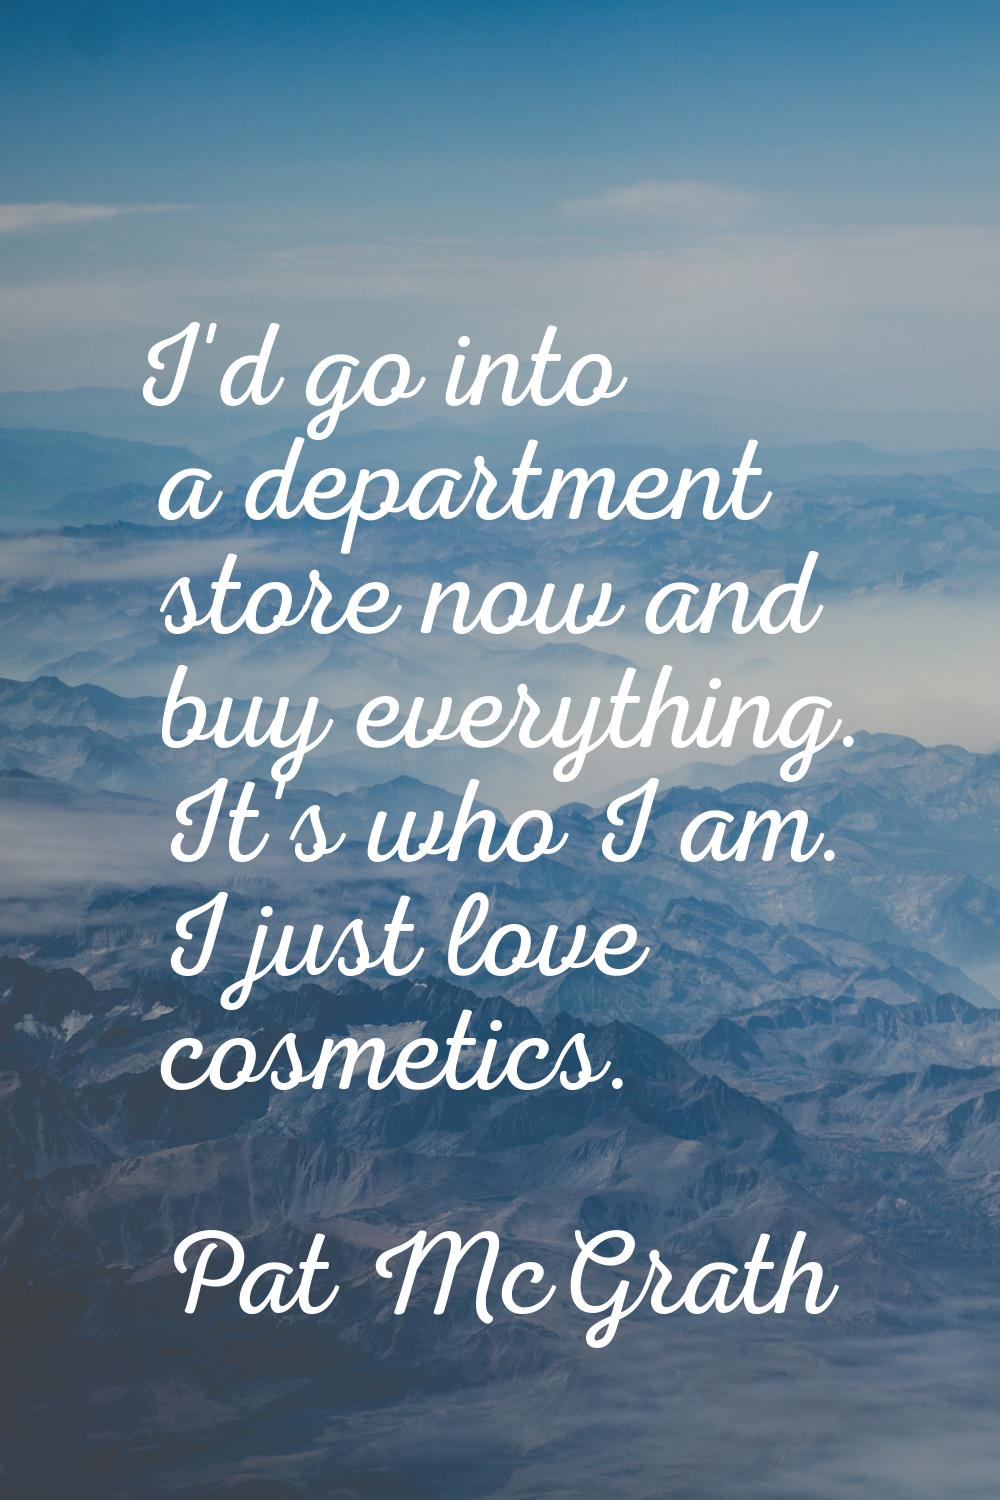 I'd go into a department store now and buy everything. It's who I am. I just love cosmetics.